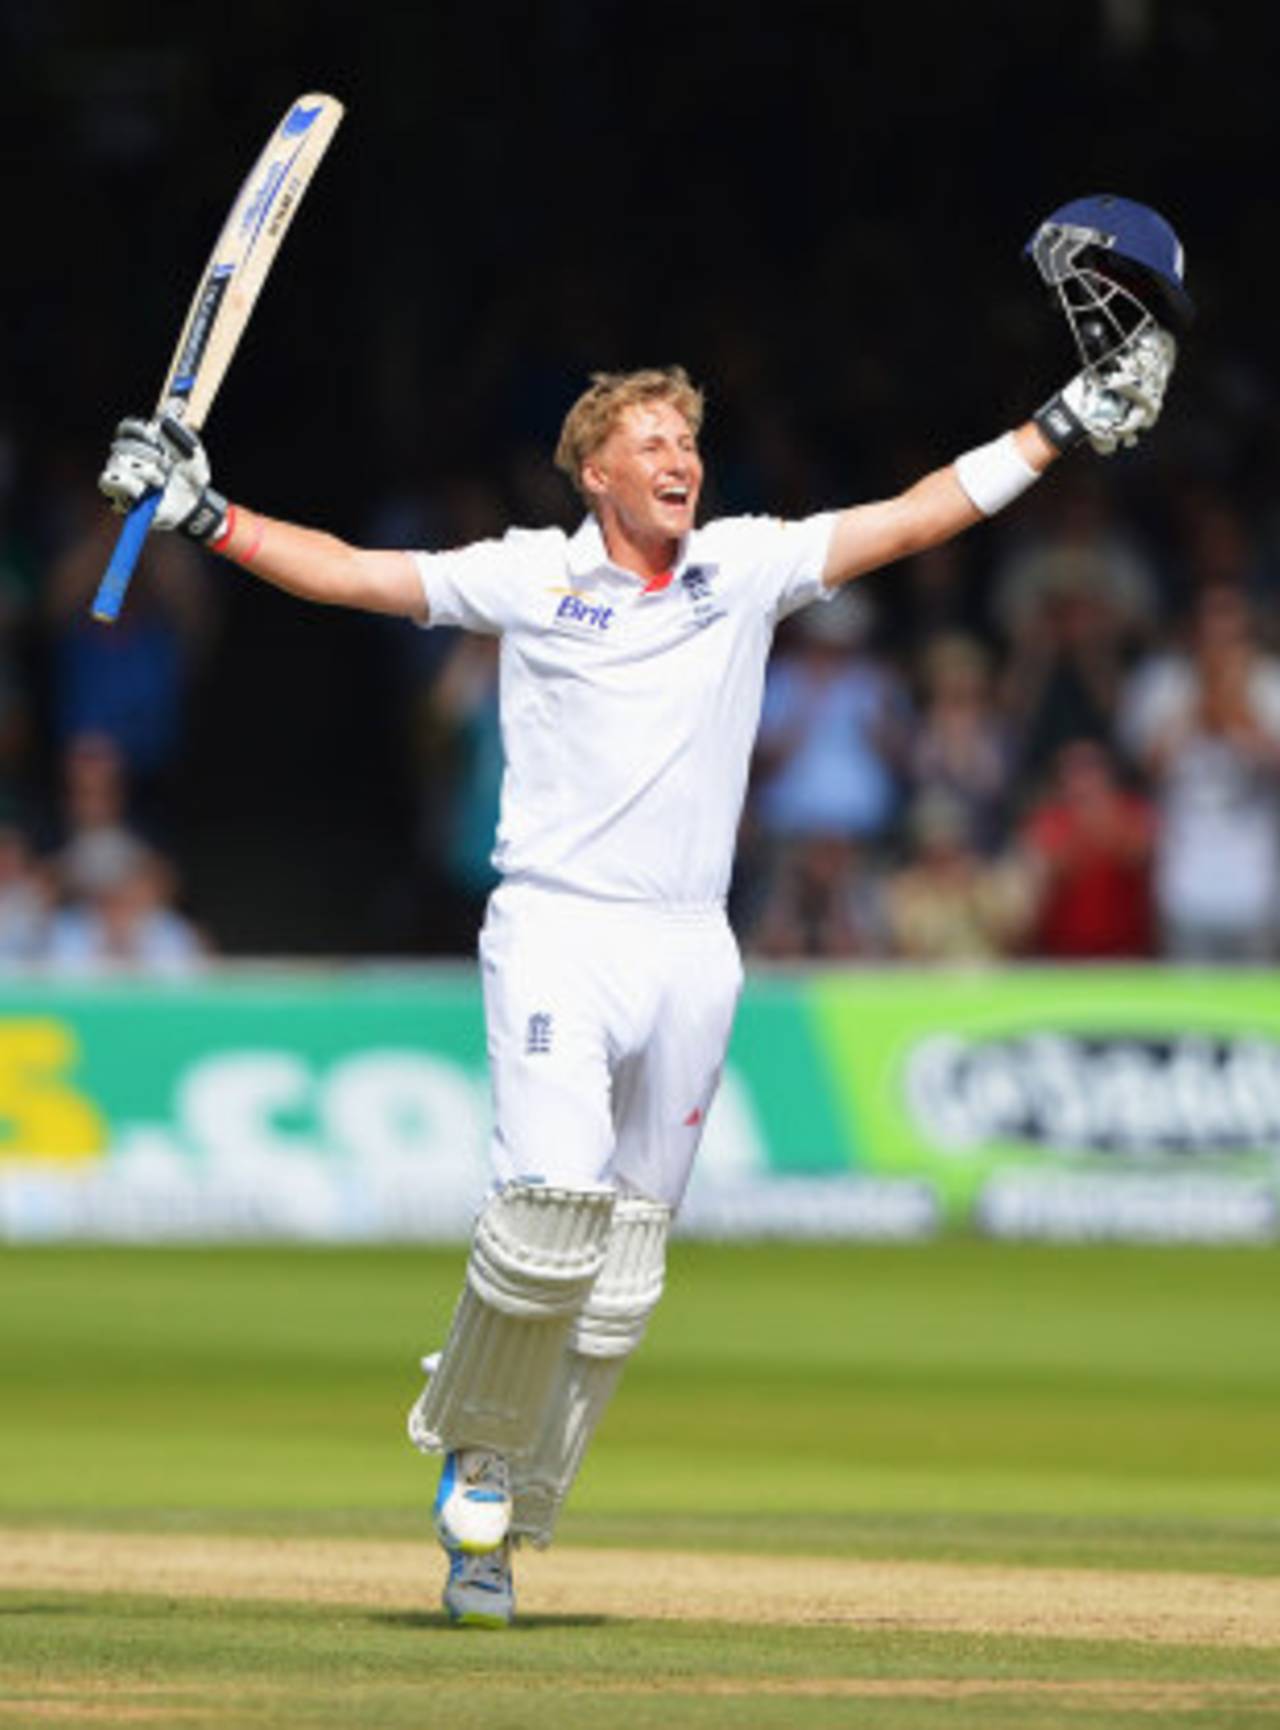 Joe Root completes his first Ashes hundred, England v Australia, 2nd Investec Test, Lord's, 3rd day, July 20, 2013